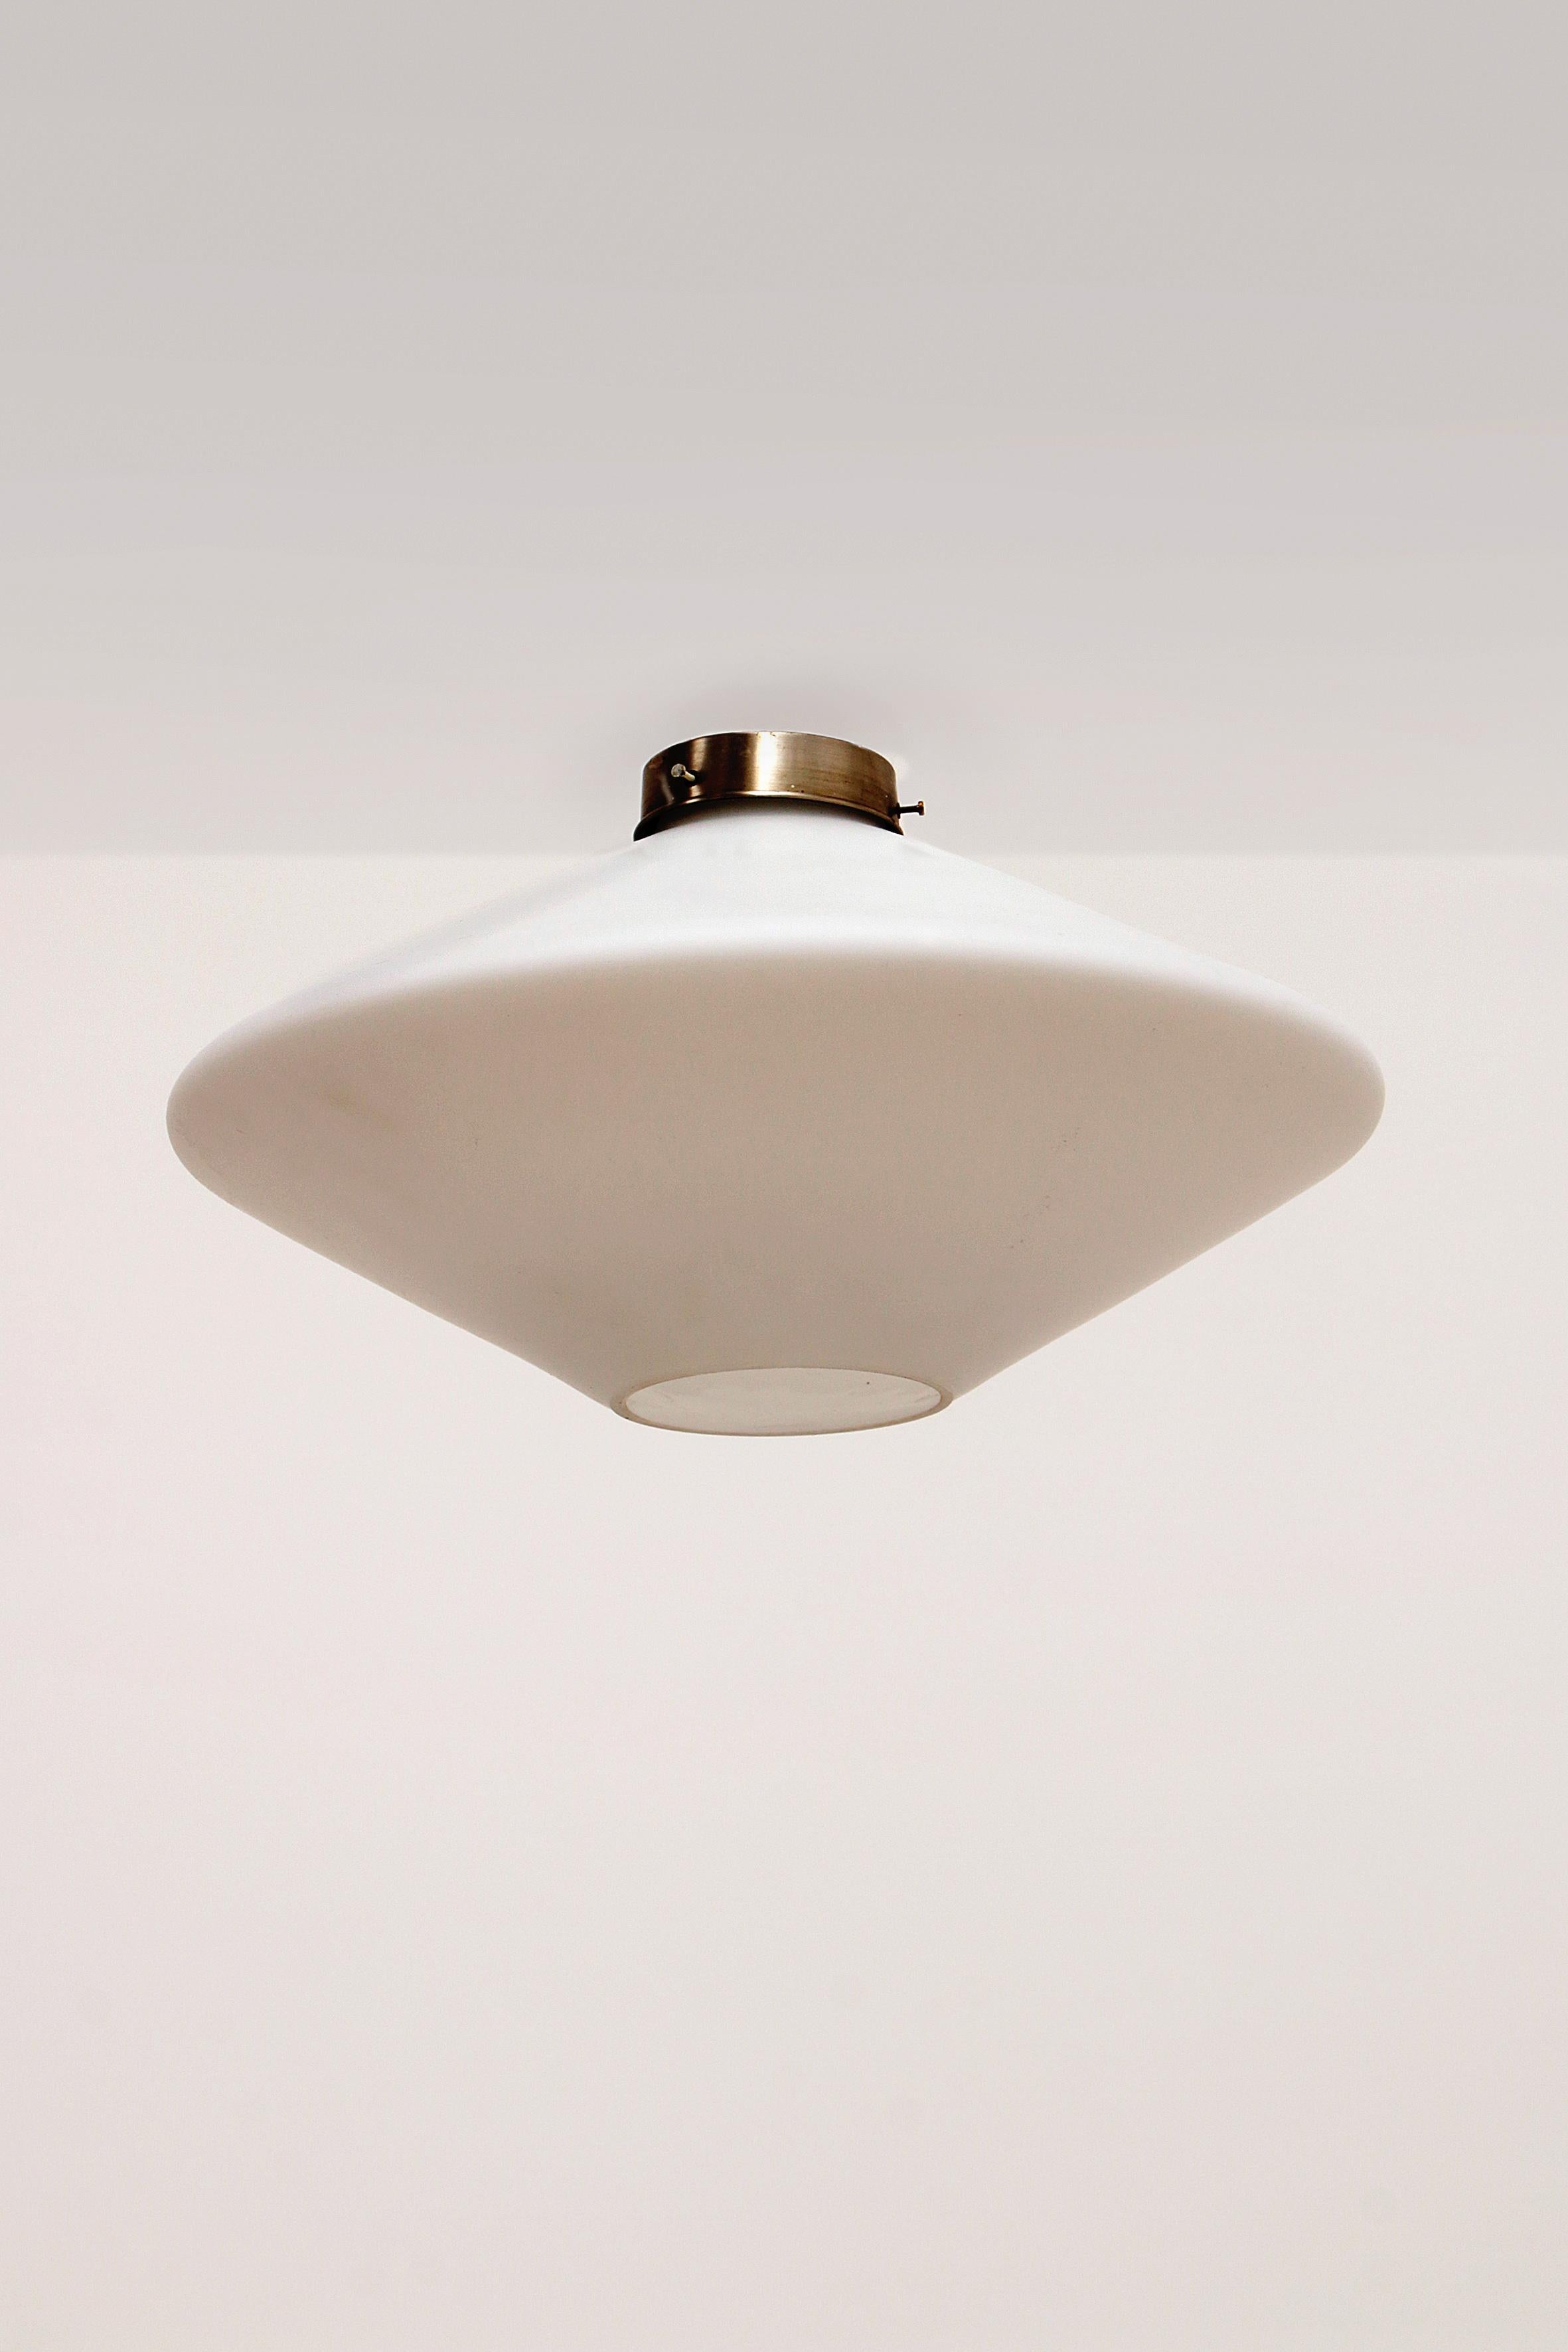 Vintage ceiling lamp from the late fifties early sixties. Specially designed white milk glass UFO hanging on a chrome-colored metal hood. The condition is good considering the age.

Sustainable: environmentally conscious By supplementing your